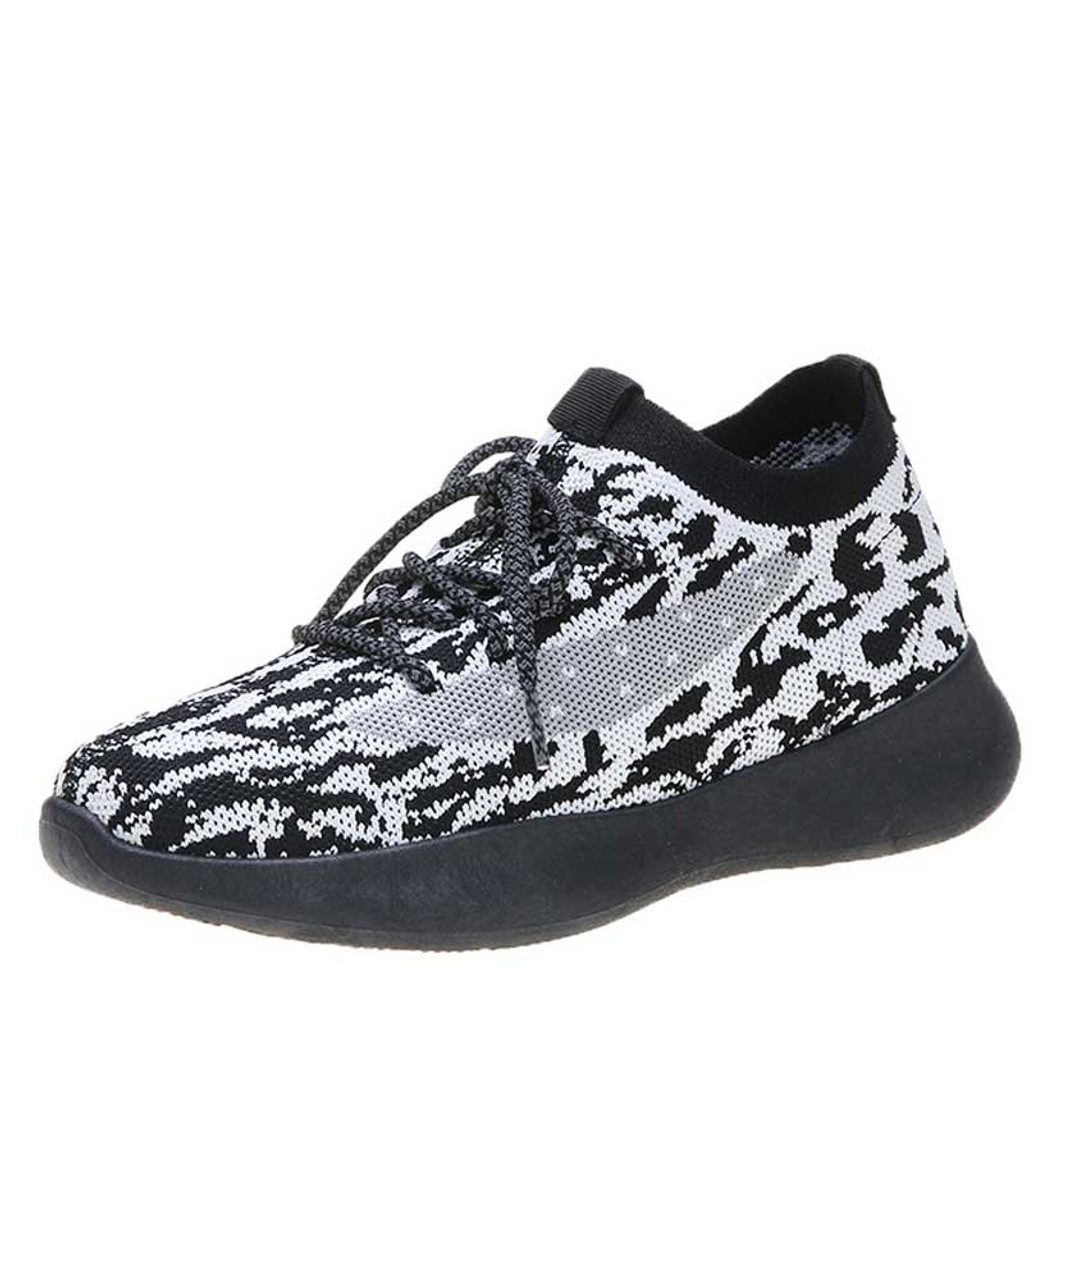 leopard print shoes sneakers